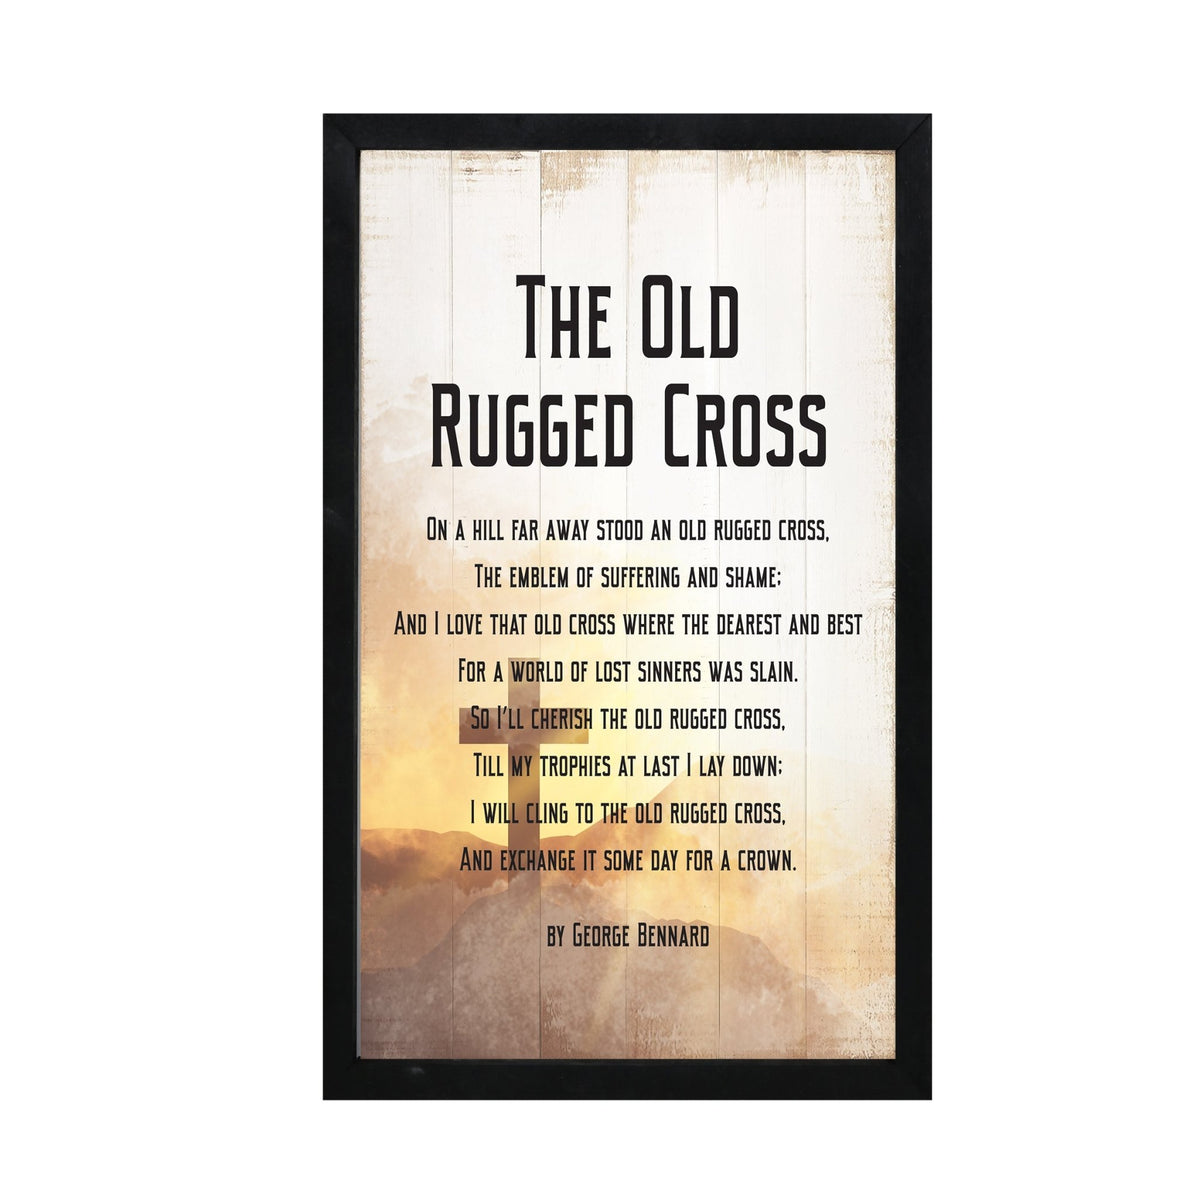 Modern-Inspired Framed Shadow Box For Home &amp; Gift Ideas - The Old Rugged Cross - LifeSong Milestones